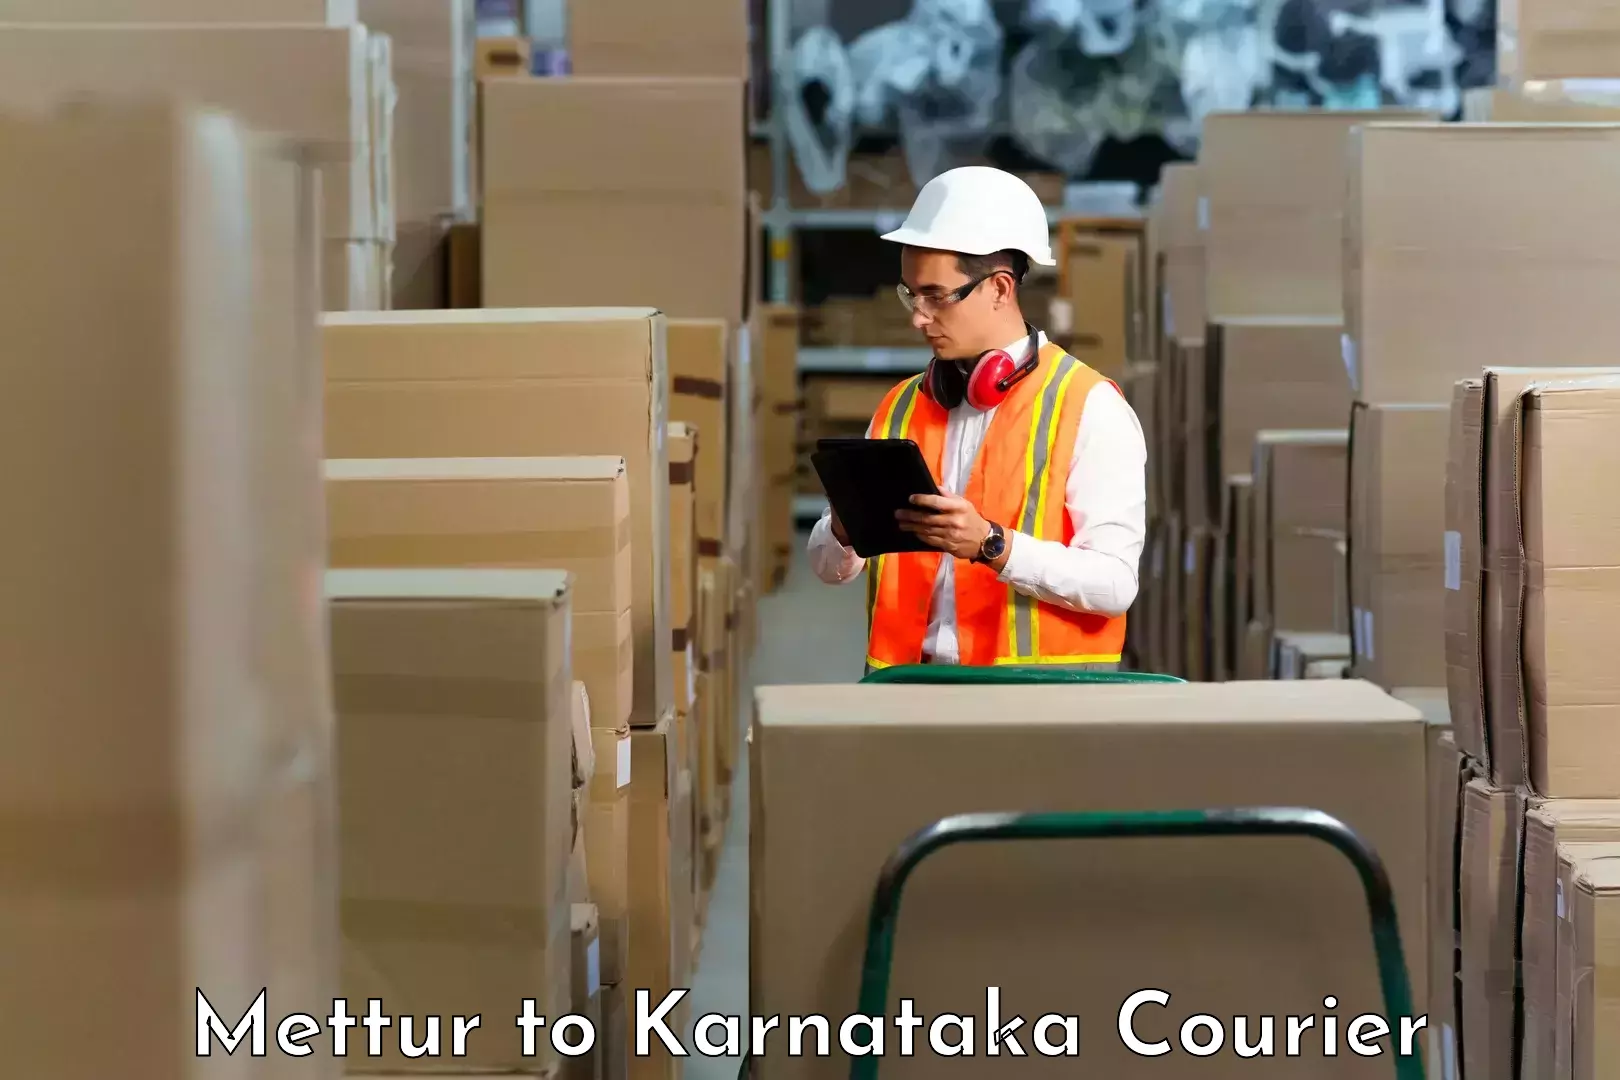 State-of-the-art courier technology Mettur to Dharwad